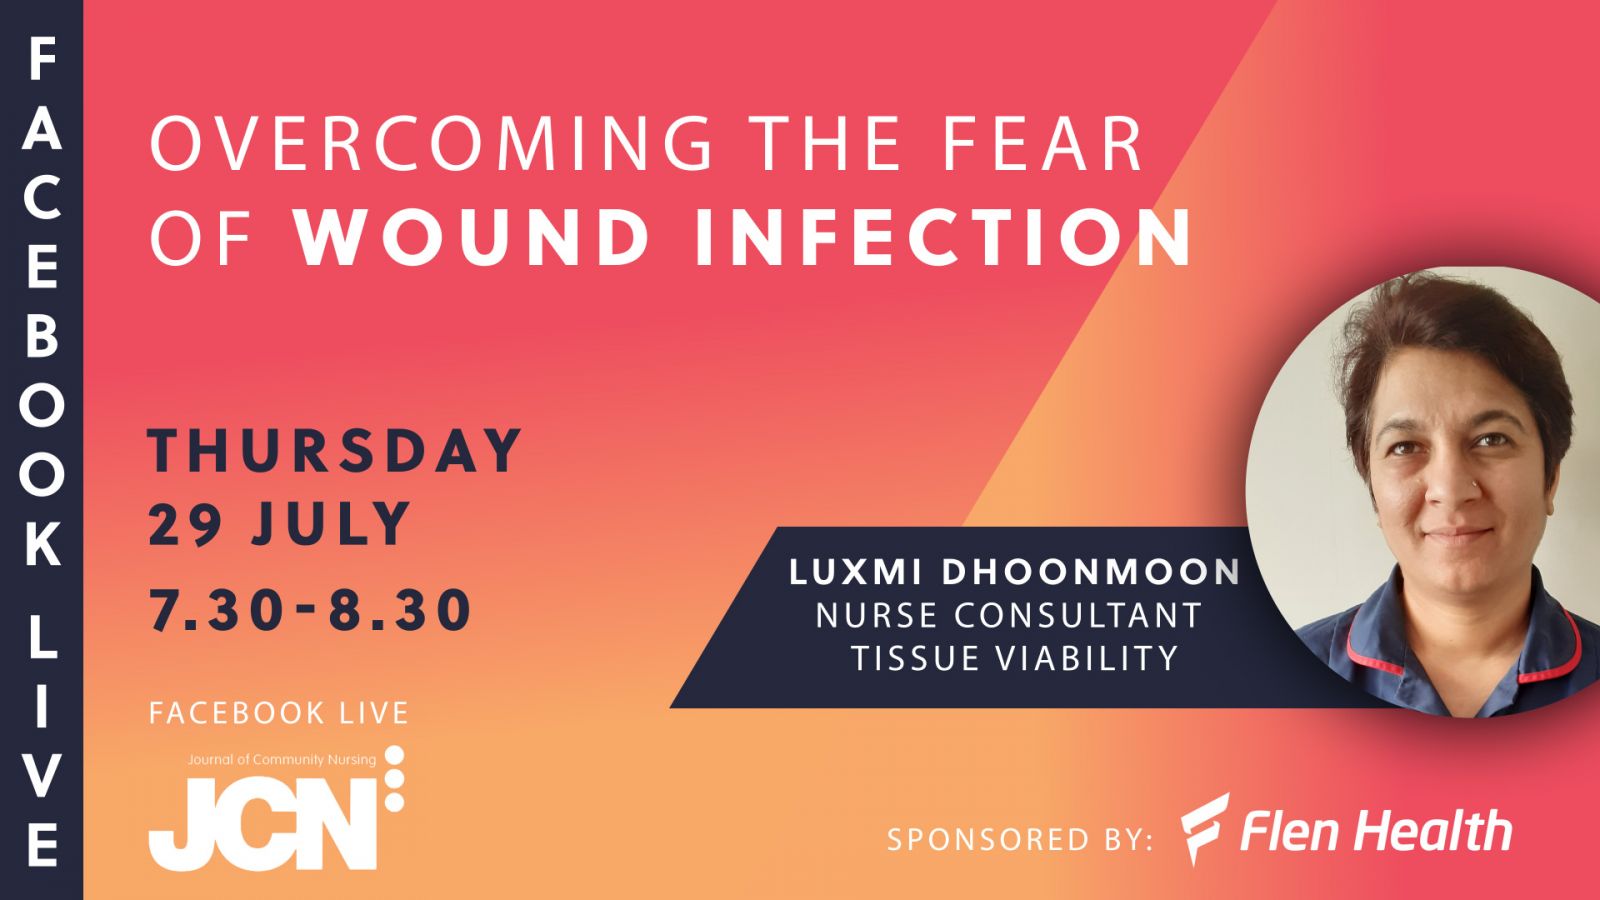 Facebook Live: Overcoming the fear of wound infection - Video